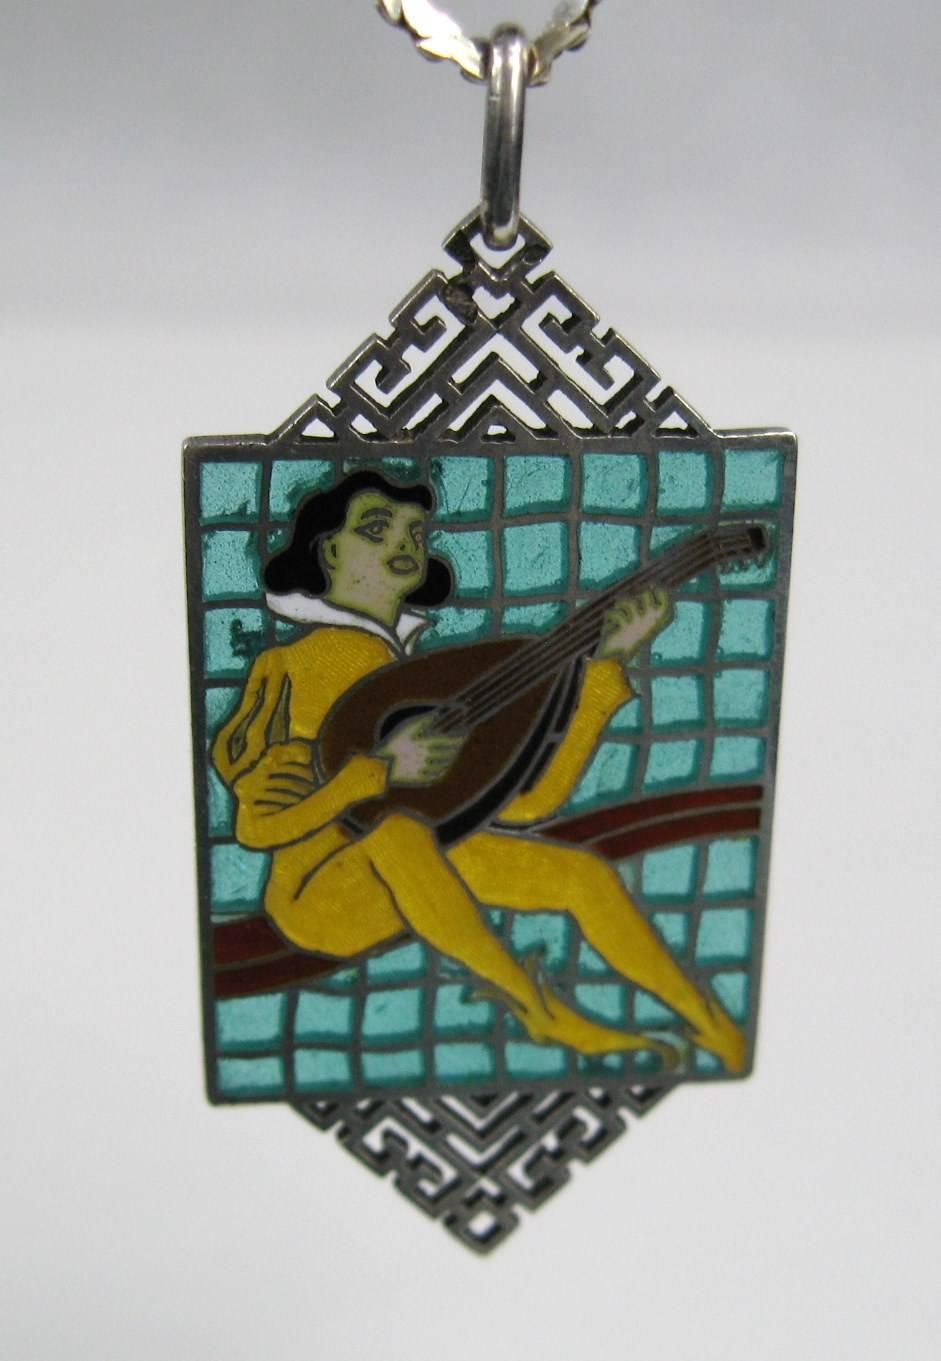  The image on this wonderful pendant is a troubador, and he is playing a lute. Troubador's have other names, depending on their region, such as trouvere or jongleur. Most people are more familiar with the term troubador, who roamed about the